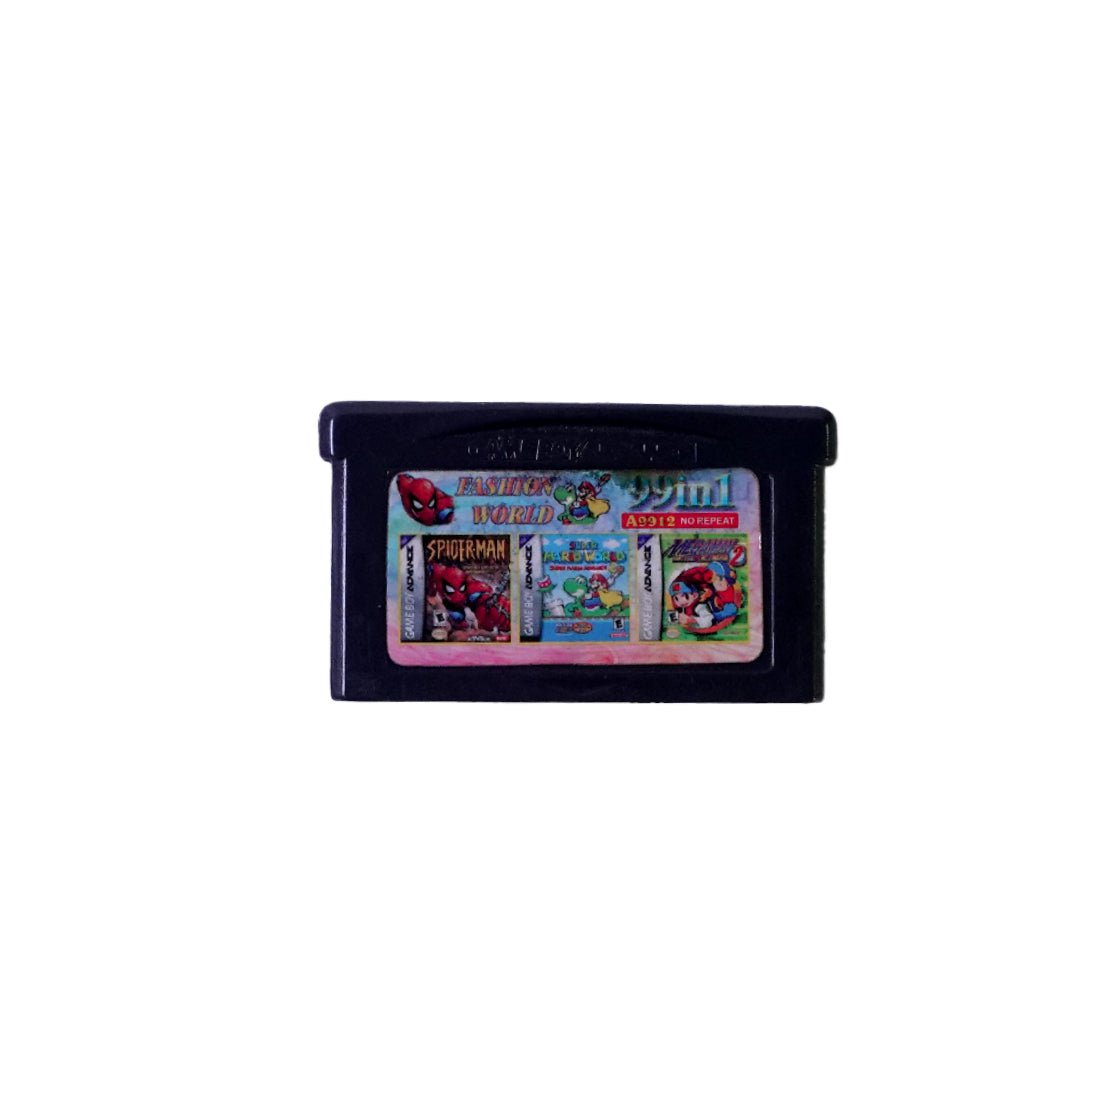 (Pre-Owned) 99 in 1 Game - Gameboy Advance - ريترو - Store 974 | ستور ٩٧٤